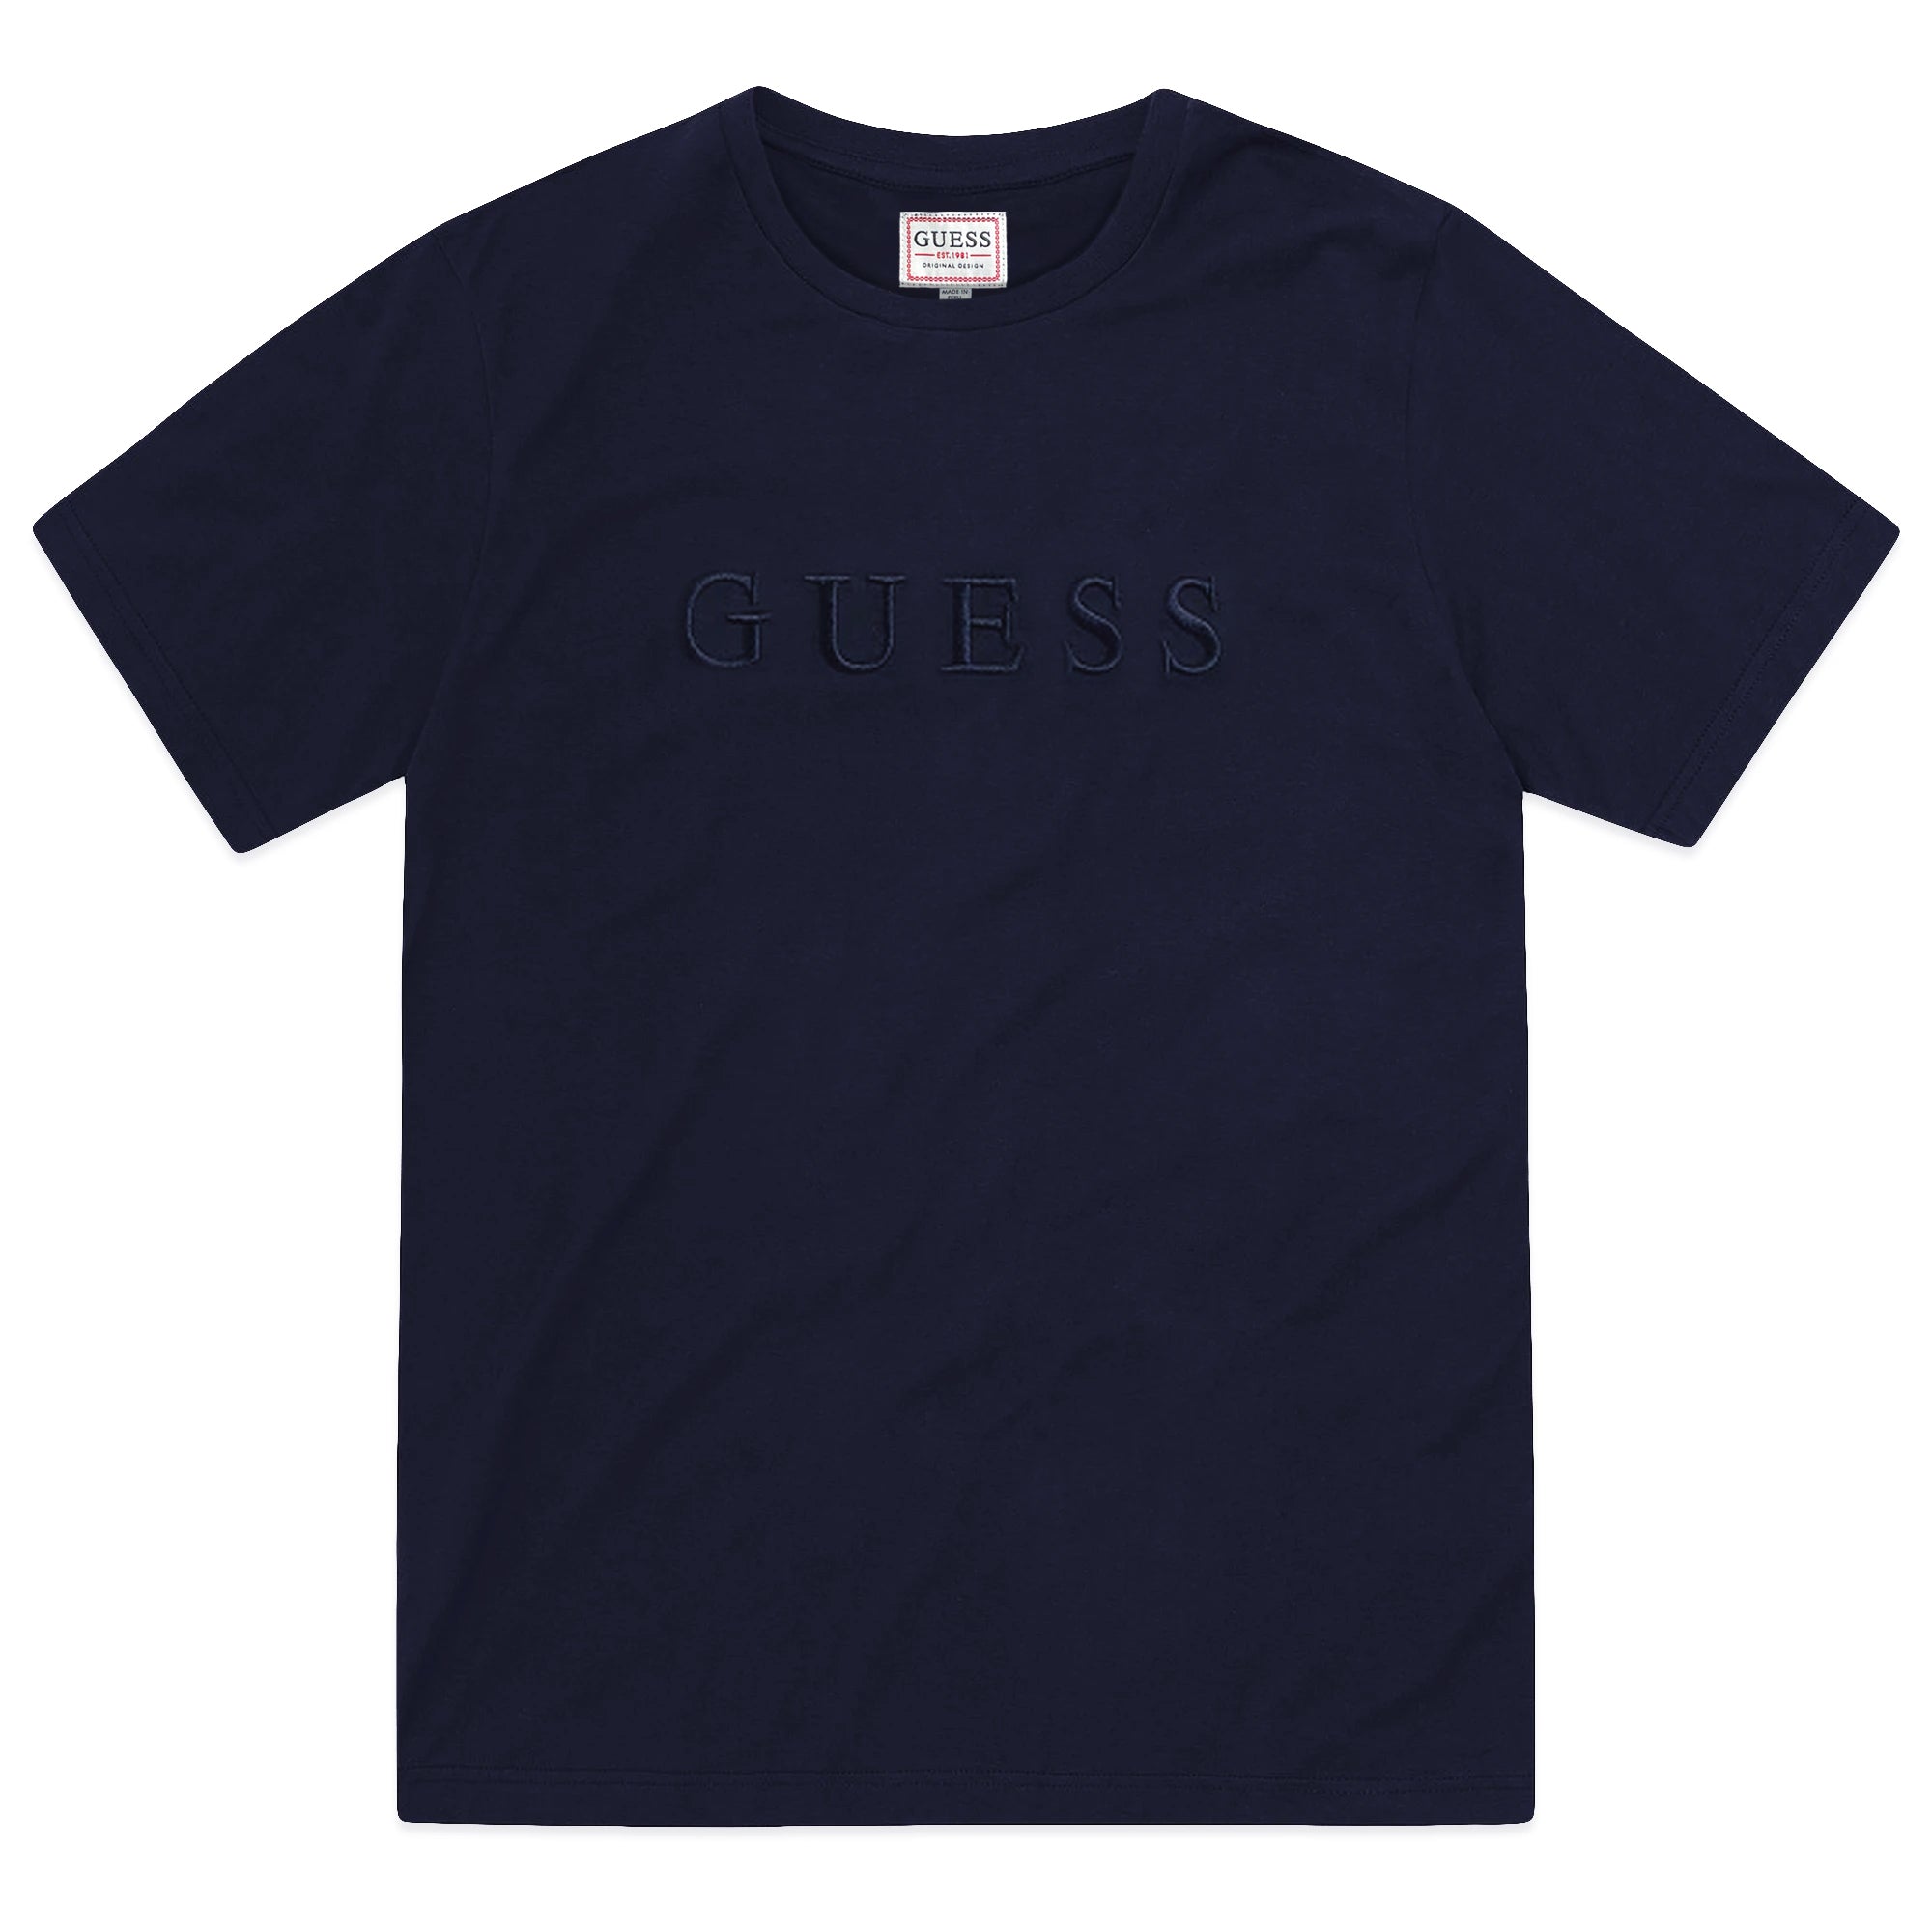 Guess Pima Cotton Embroidery Logo T-Shirt - Navy